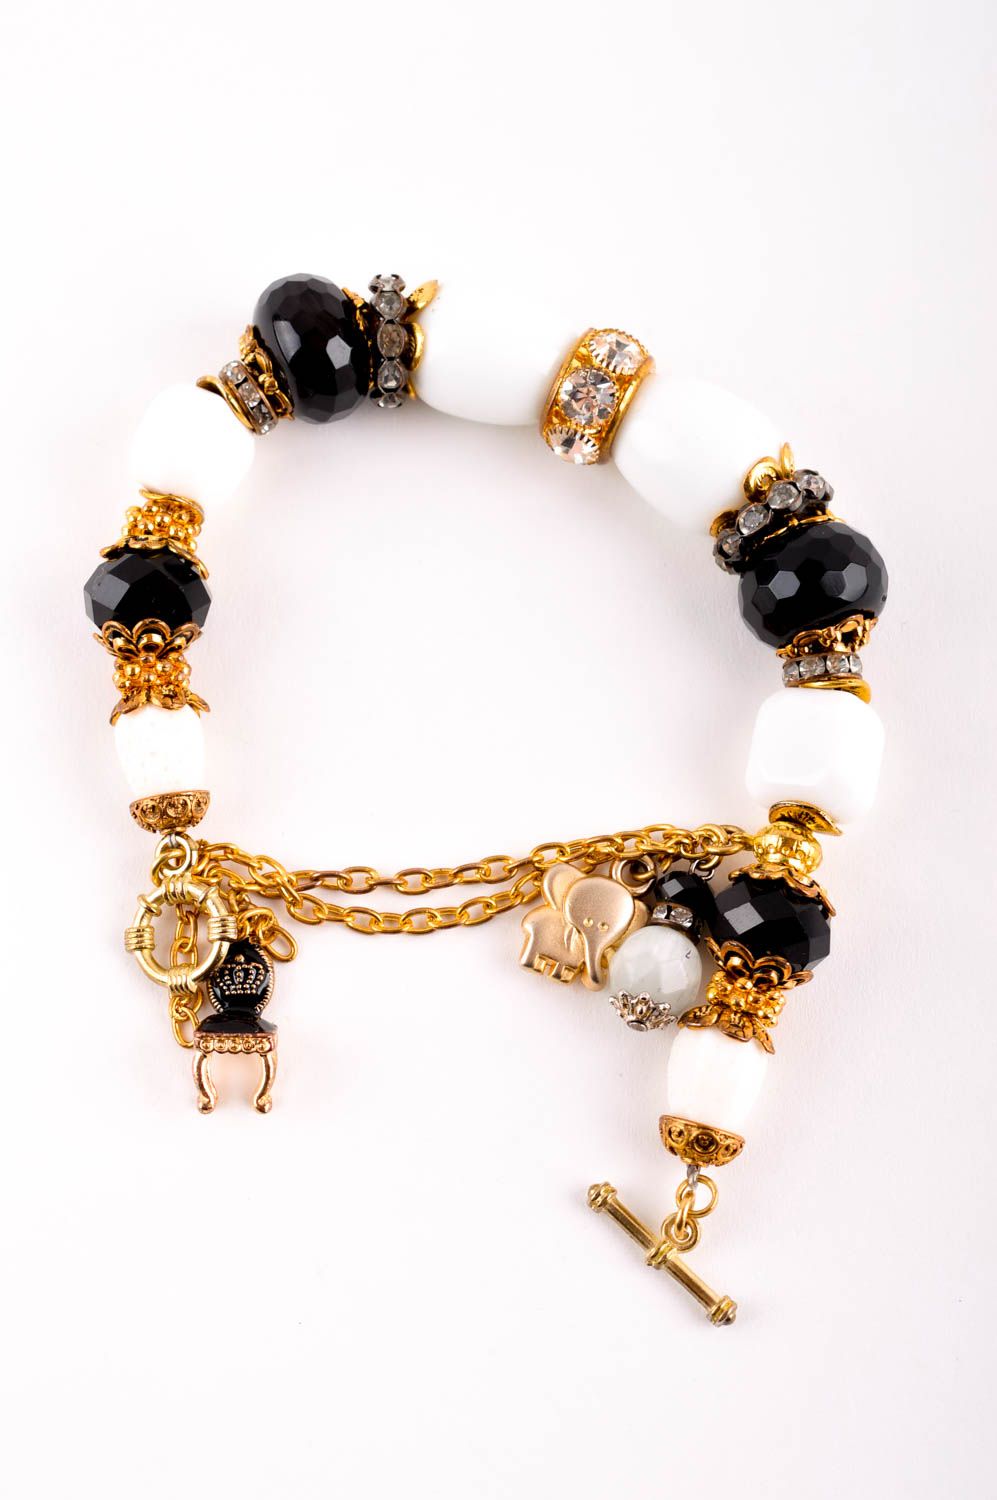 Handmade gemstone beaded bracelet with black and white beads and gold color charms for girls photo 4